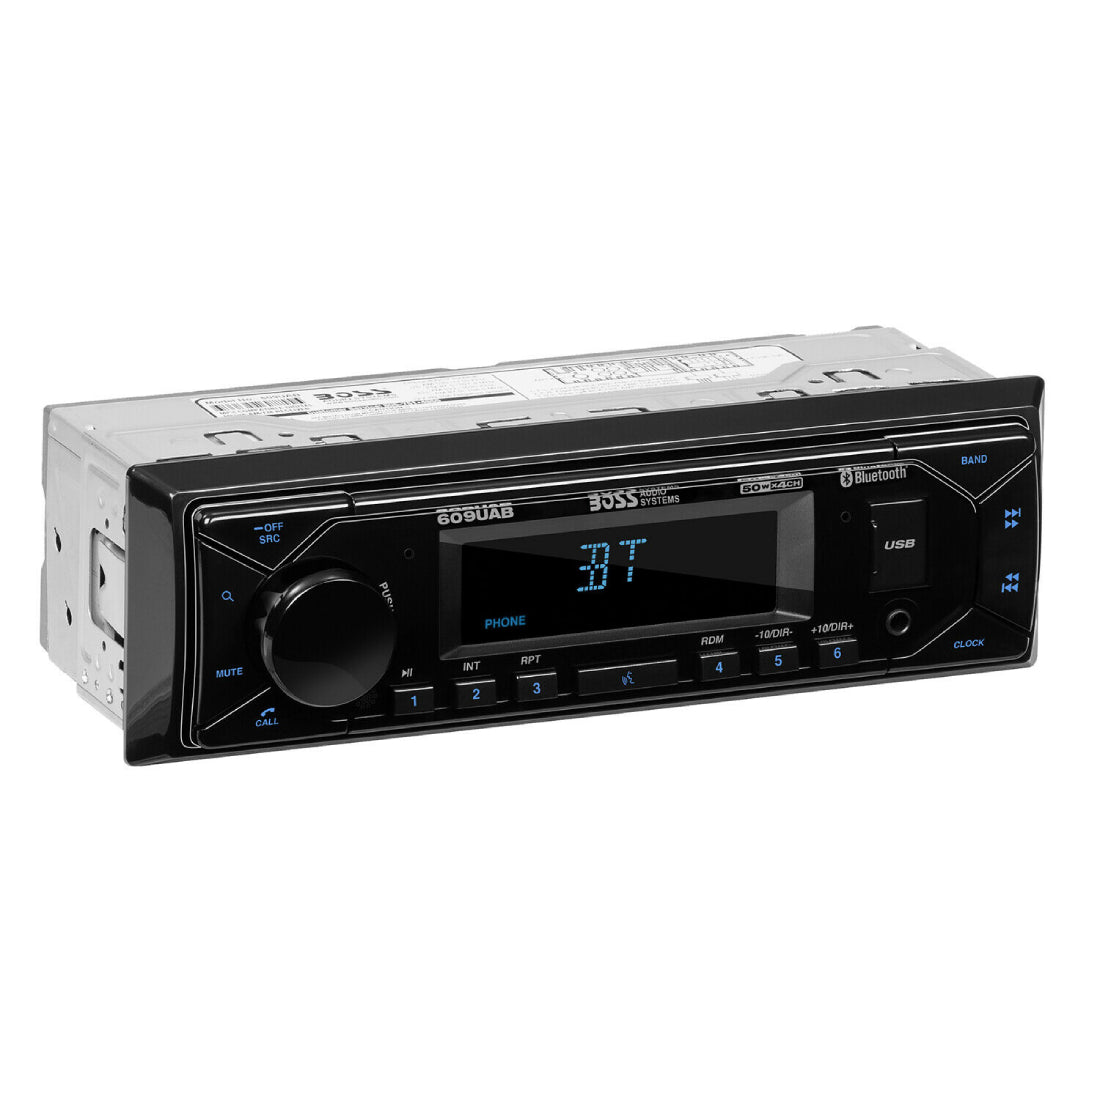 Boss Audio 609UAB 1-DIN Car Stereo In-Dash Mechless Bluetooth Multimedia Receiver